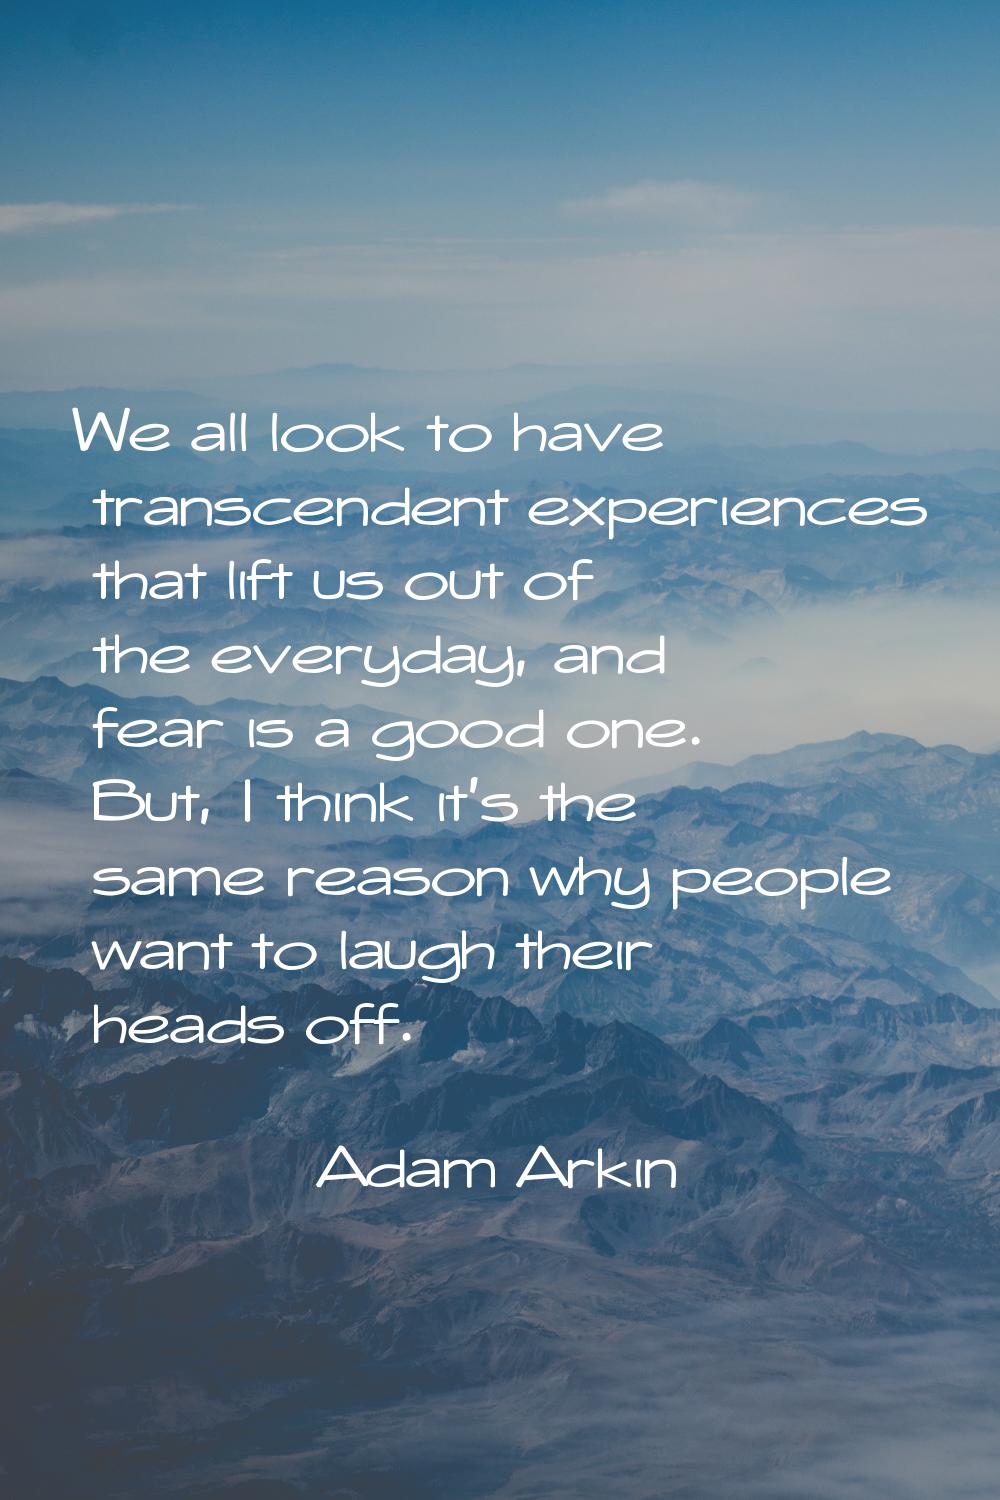 We all look to have transcendent experiences that lift us out of the everyday, and fear is a good o